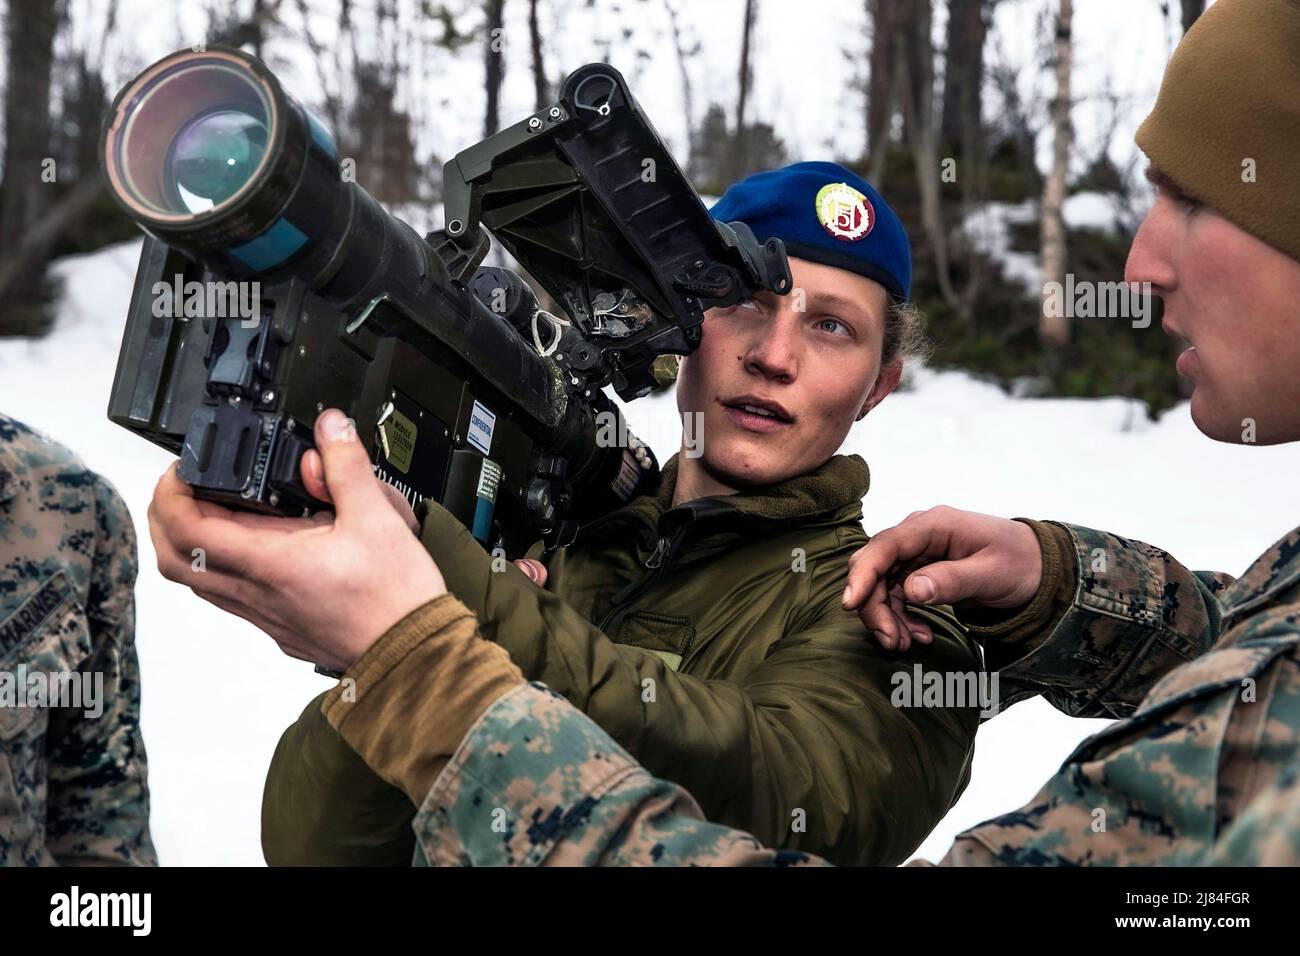 Setermoen, Norway. 25th Apr, 2022. U.S. Marines Corps Lance Cpl. Dylan Pennington, right, assigned to the Aviation Combat Element, 22nd Marine Expeditionary Unit, discusses the functions of the FIM-92 Stinger missile system to Norwegian Army Sgt. Silje Skarsbakk during a bilateral training event in Setermoen, Norway, April 25, 2022. The 22nd MEU, embarked aboard the Kearsarge Amphibious Ready Group, is participating in a bilateral training event with the Kingdom of Norway's Armed Forces to strengthen U.S. and Norway interoperability, ensuring collective capabilities and steadfast partnership Stock Photo